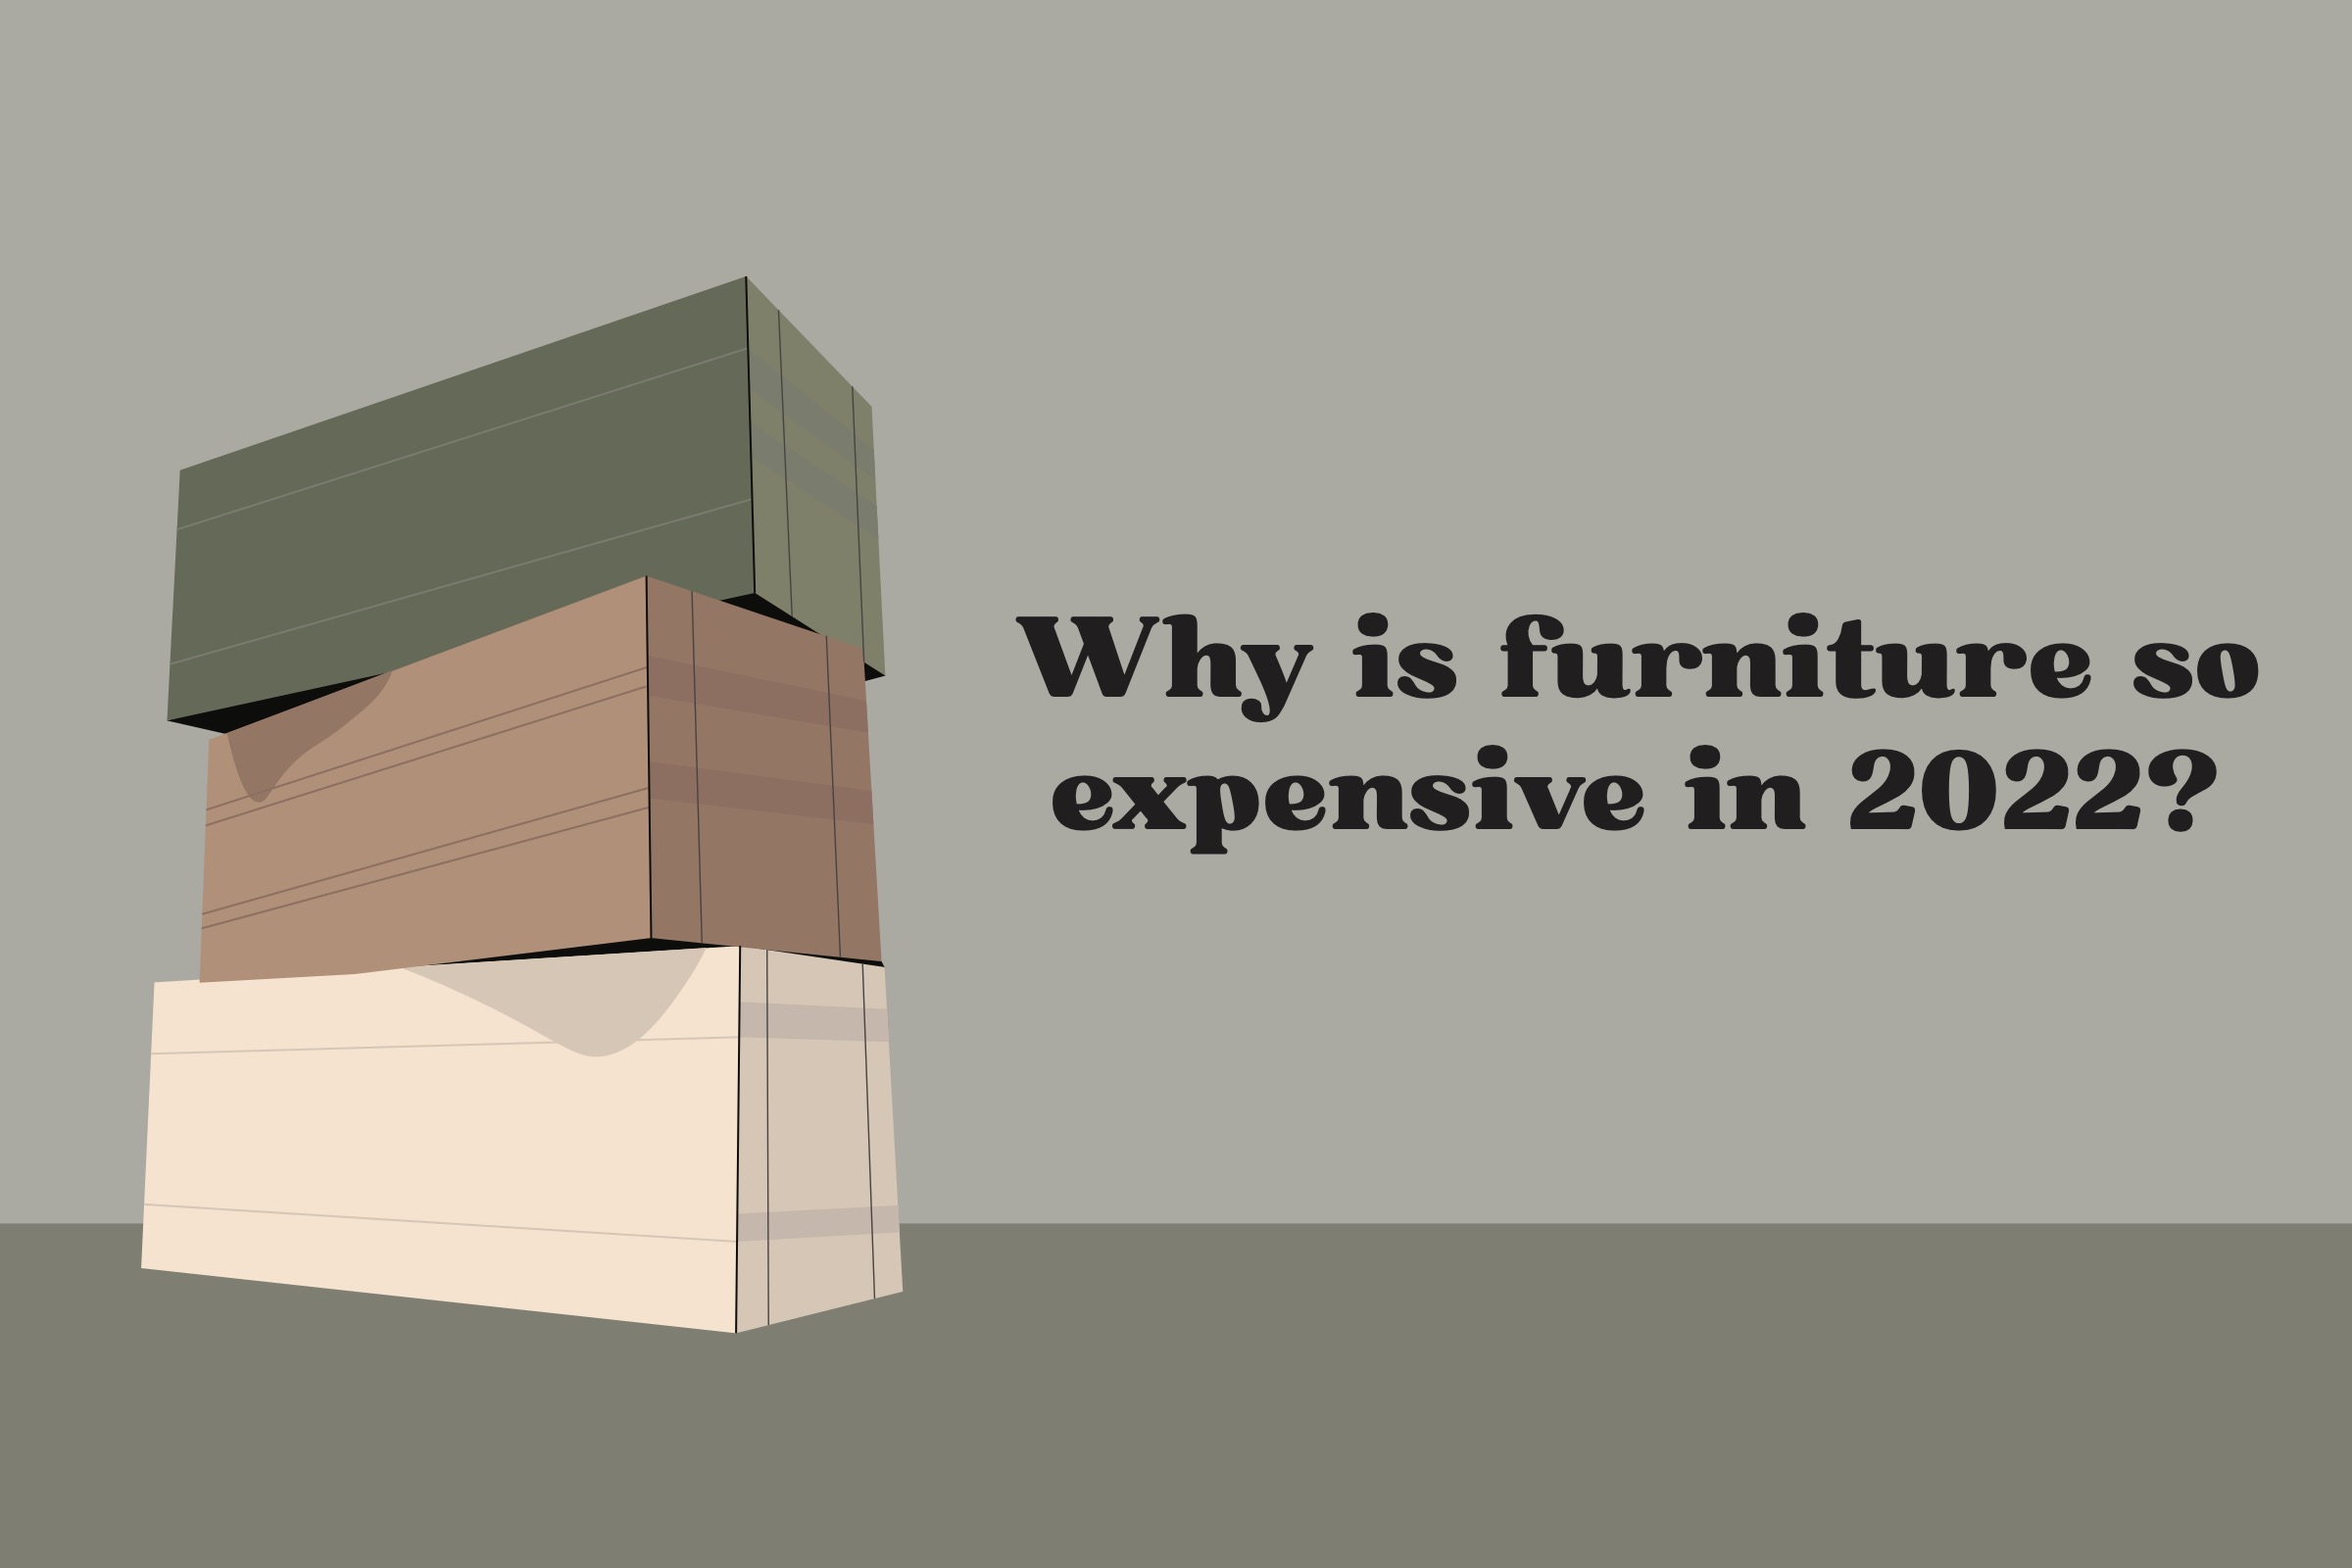 Why Is Furniture So Expensive in 2022?